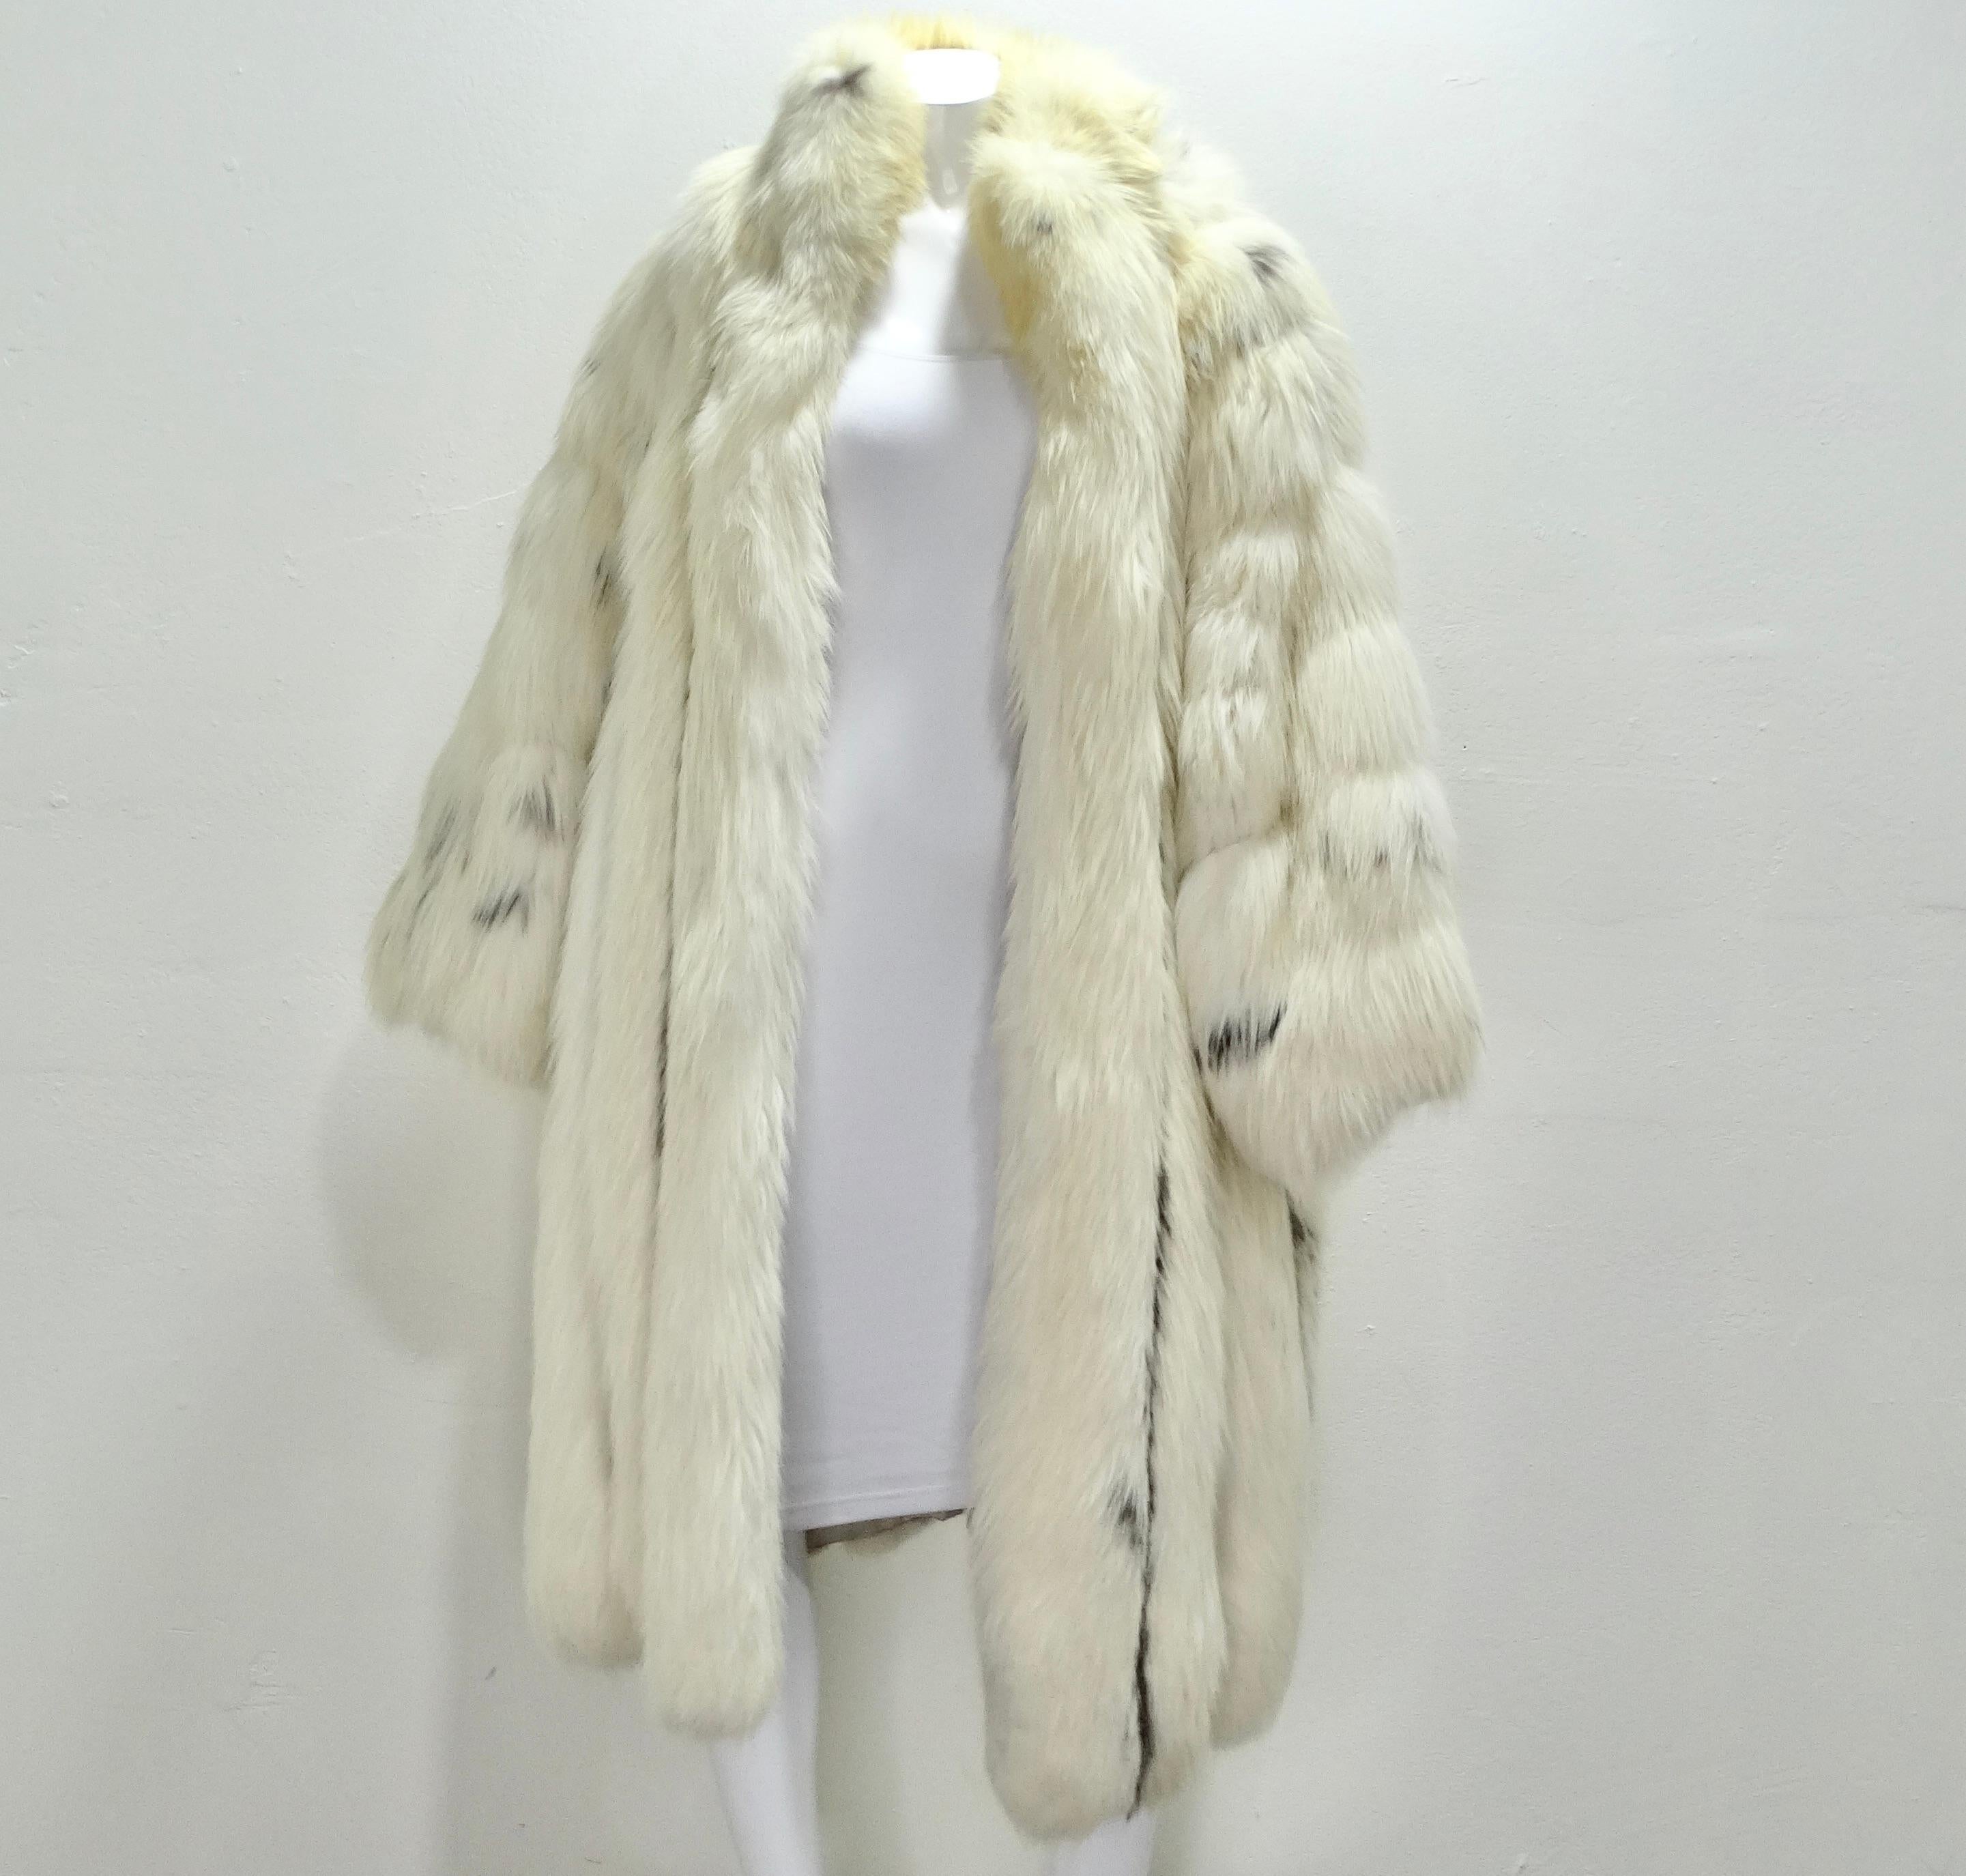 Do not miss out on this breath taking 1970s Christian Dior fur coat! The most luxurious and dramatic classic fur coat in an elegant ivory fox fur. Look closely and notice the deep brown stripes throughout, this is such a chic detail that really